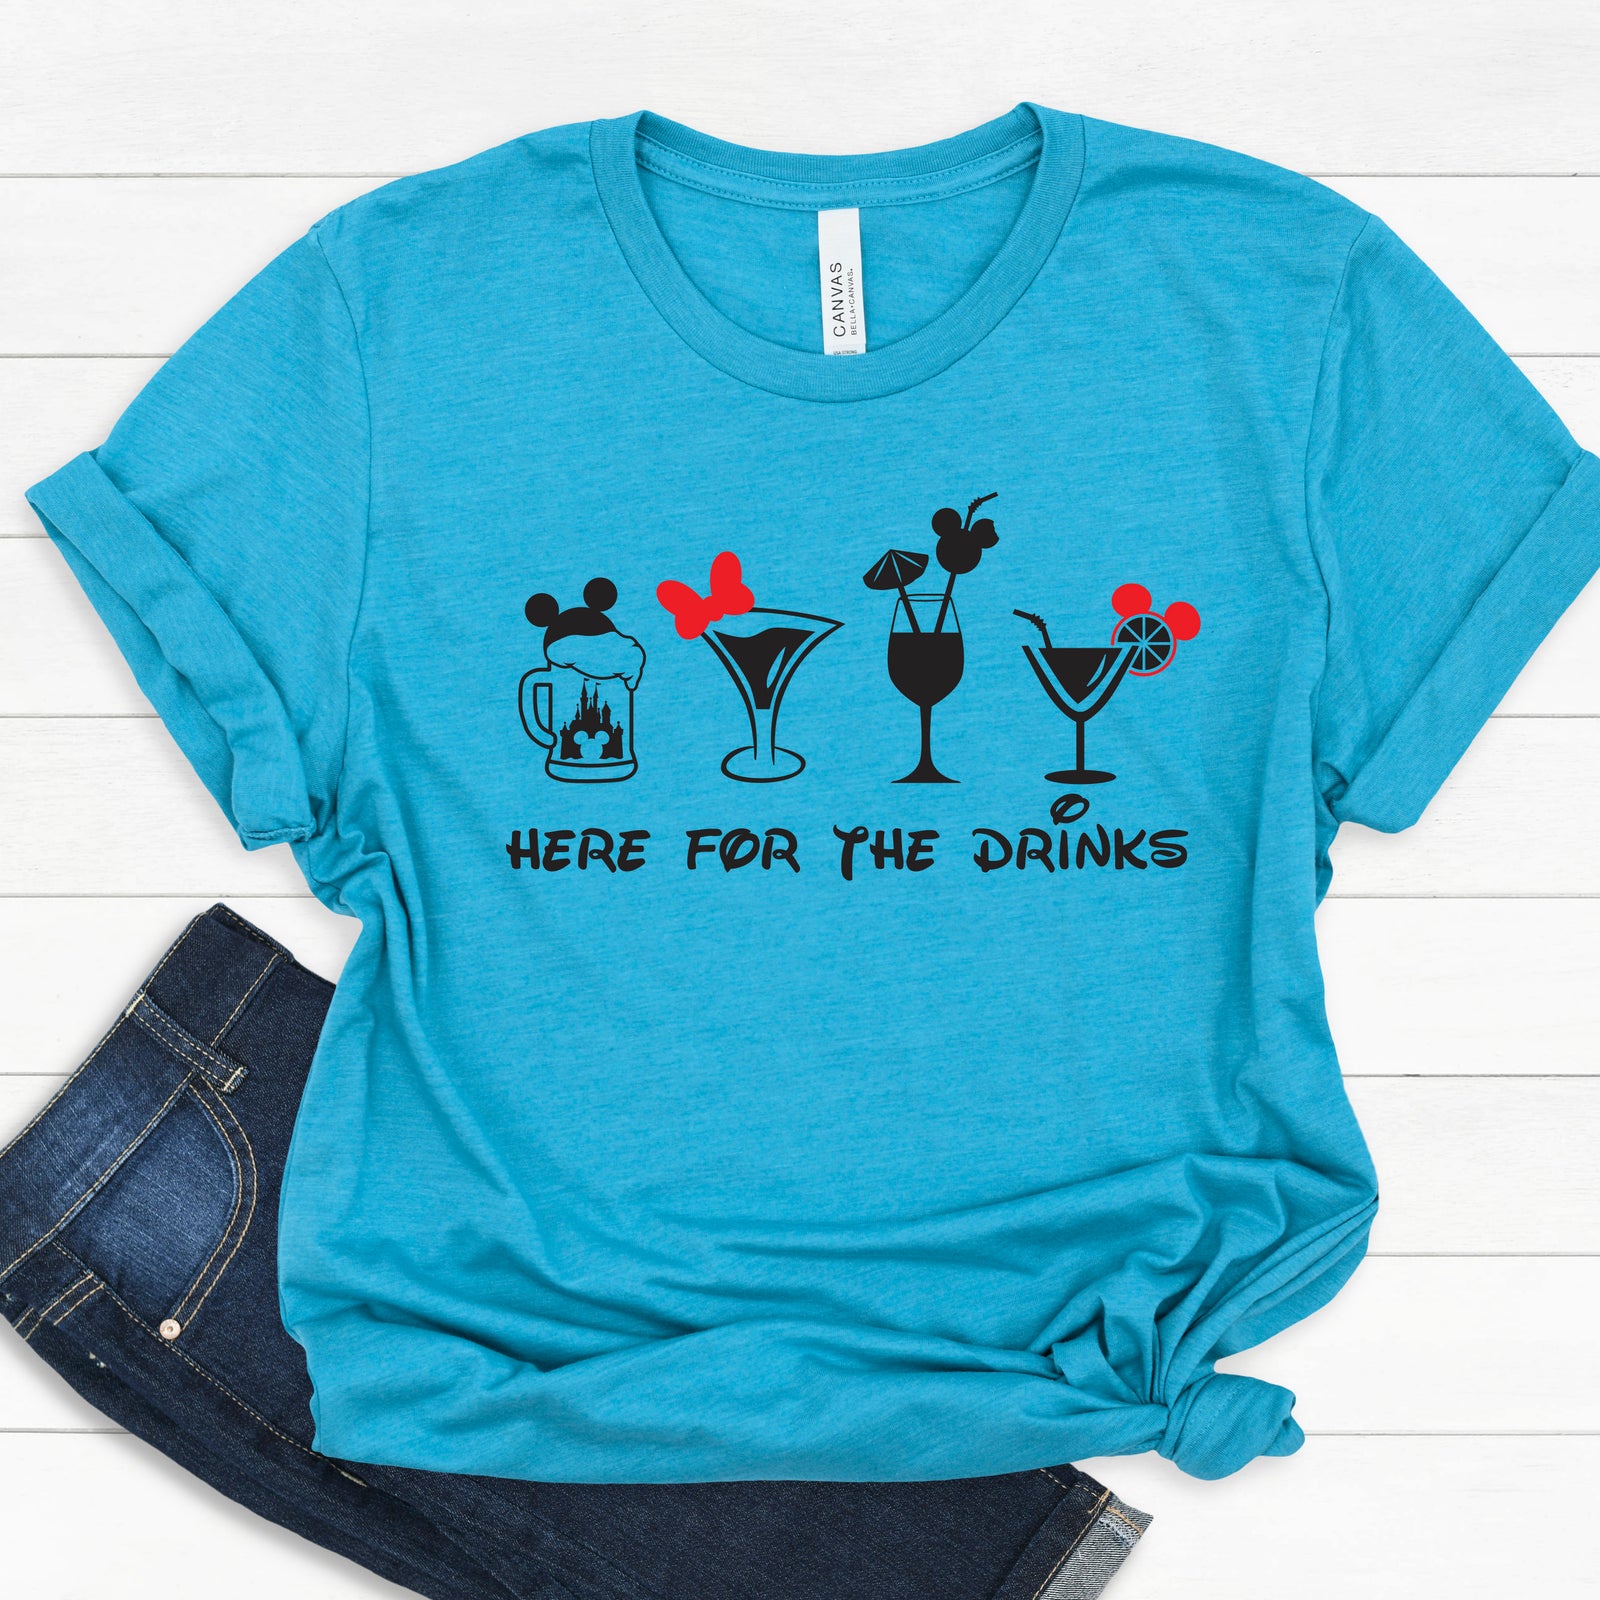 Here for the Drinks Adult Unisex T Shirt- Disney Trip Matching Shirts - Family Vacation Shirts - Minnie Bar